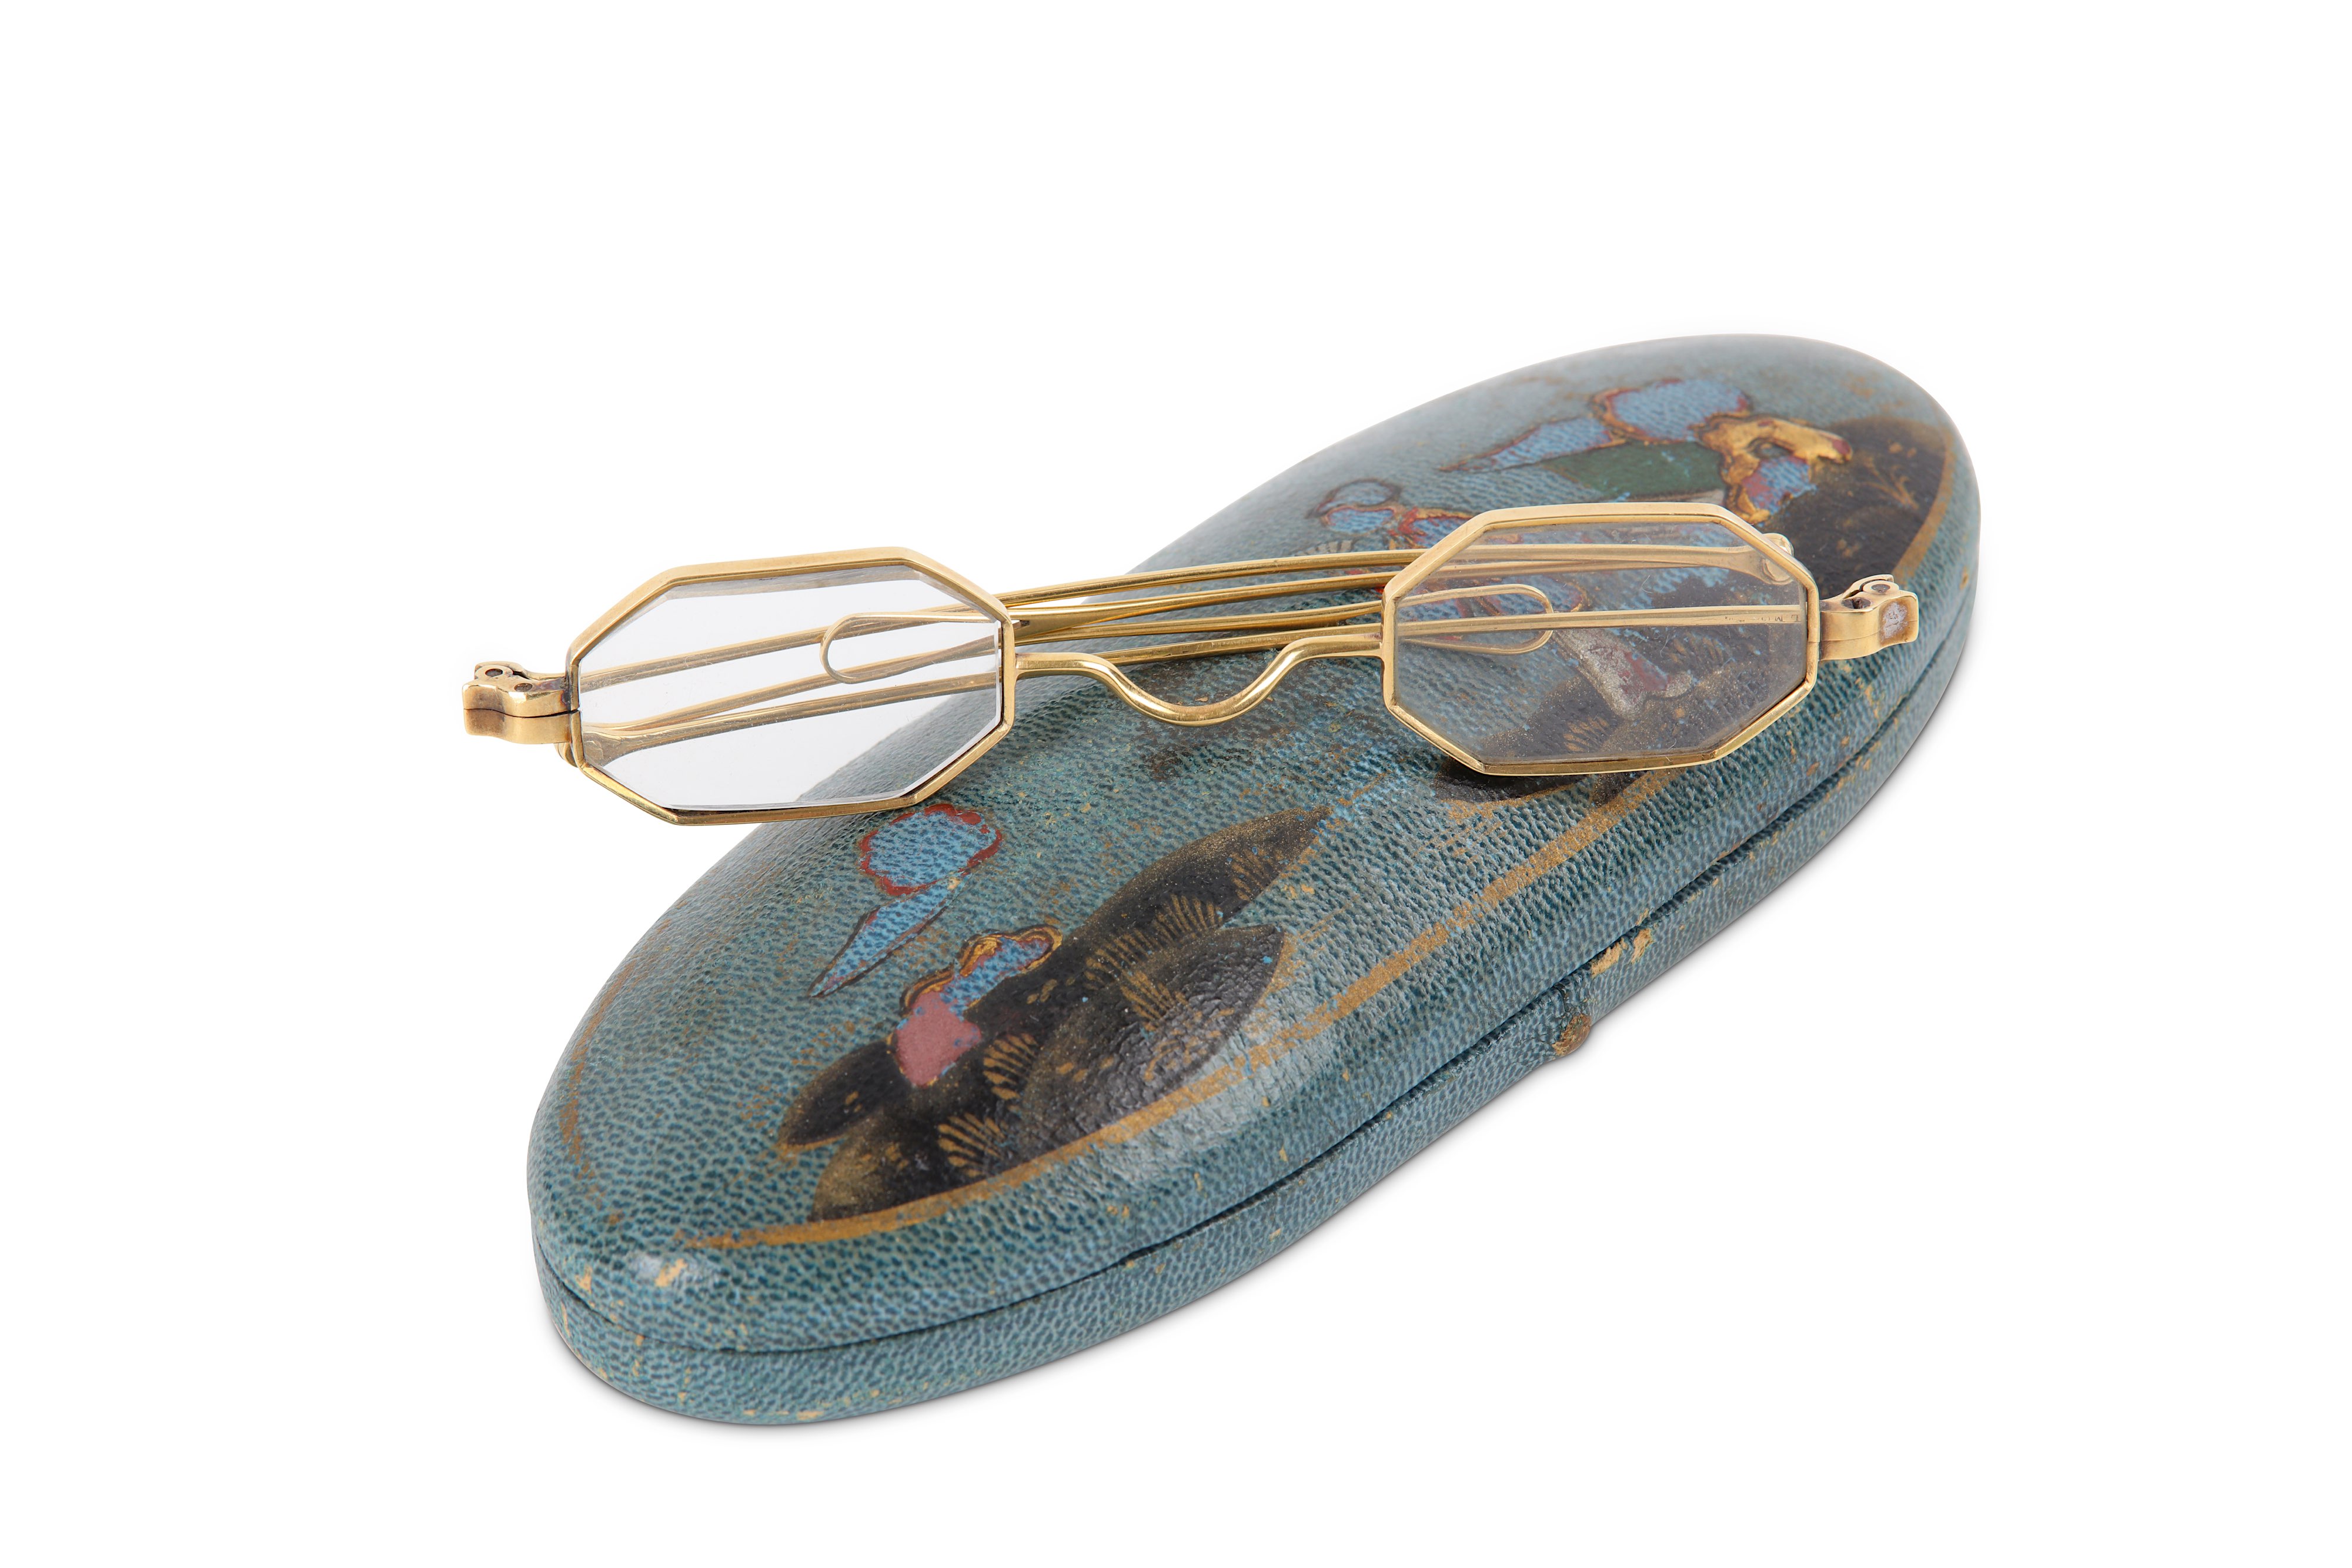 A pair of early-mid 19th century unmarked gold folding glasses, circa 1830-50